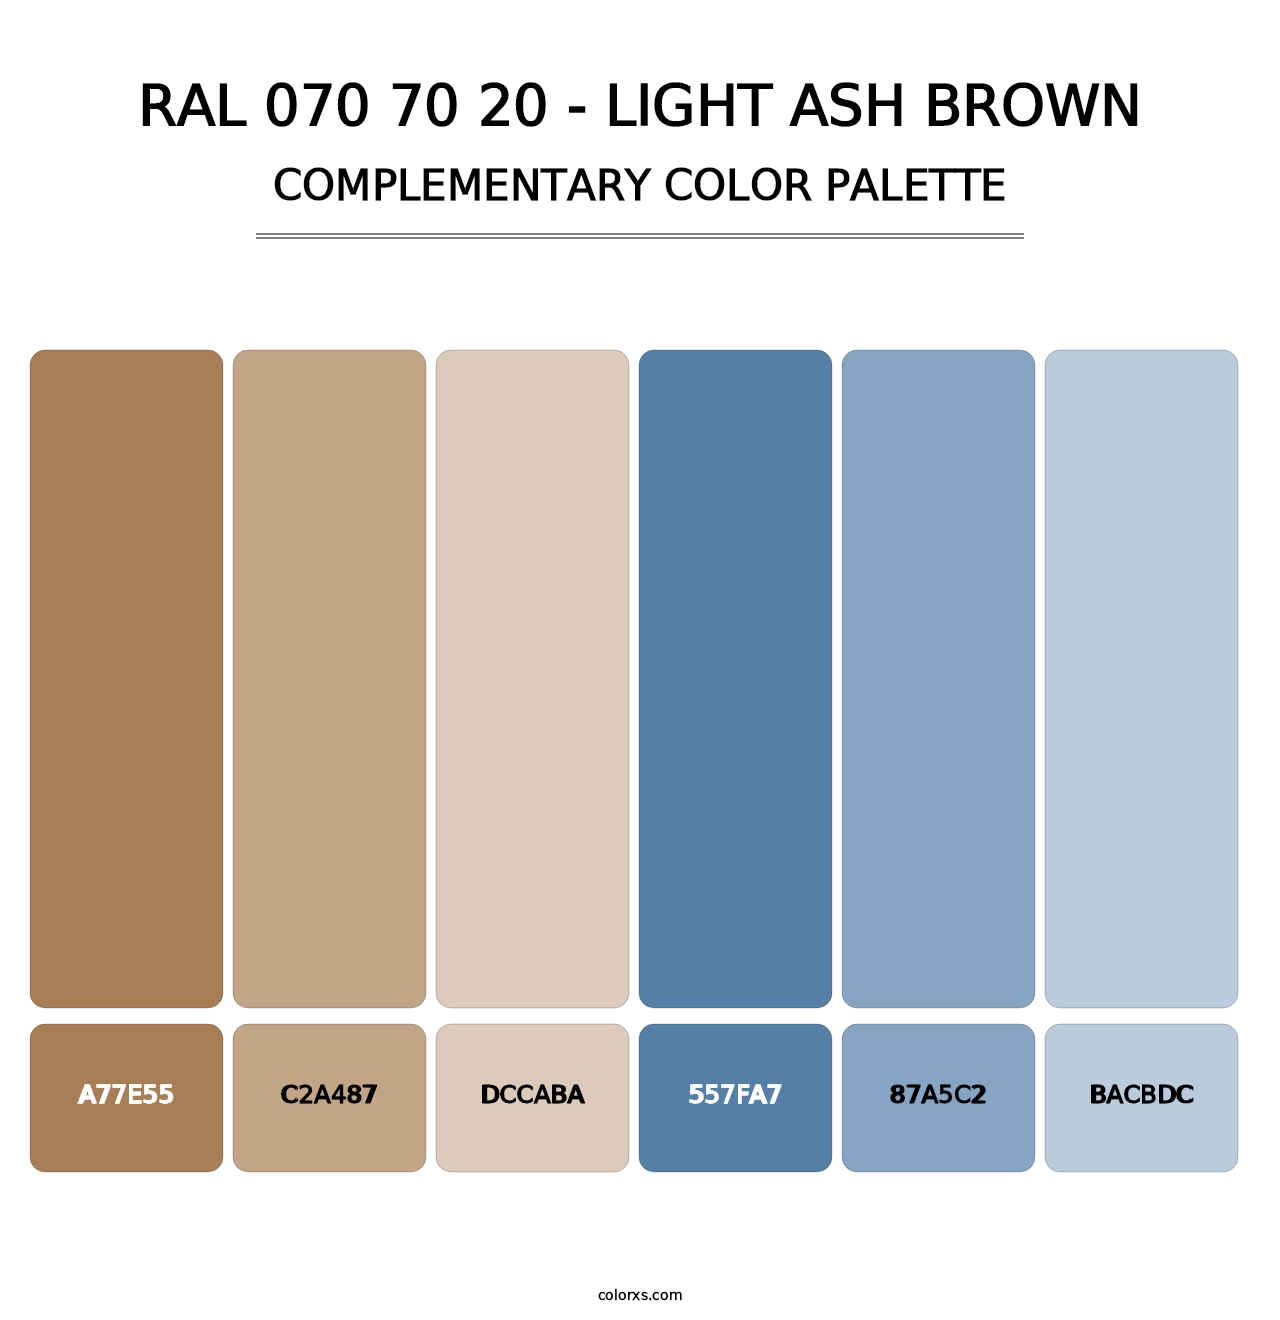 RAL 070 70 20 - Light Ash Brown - Complementary Color Palette